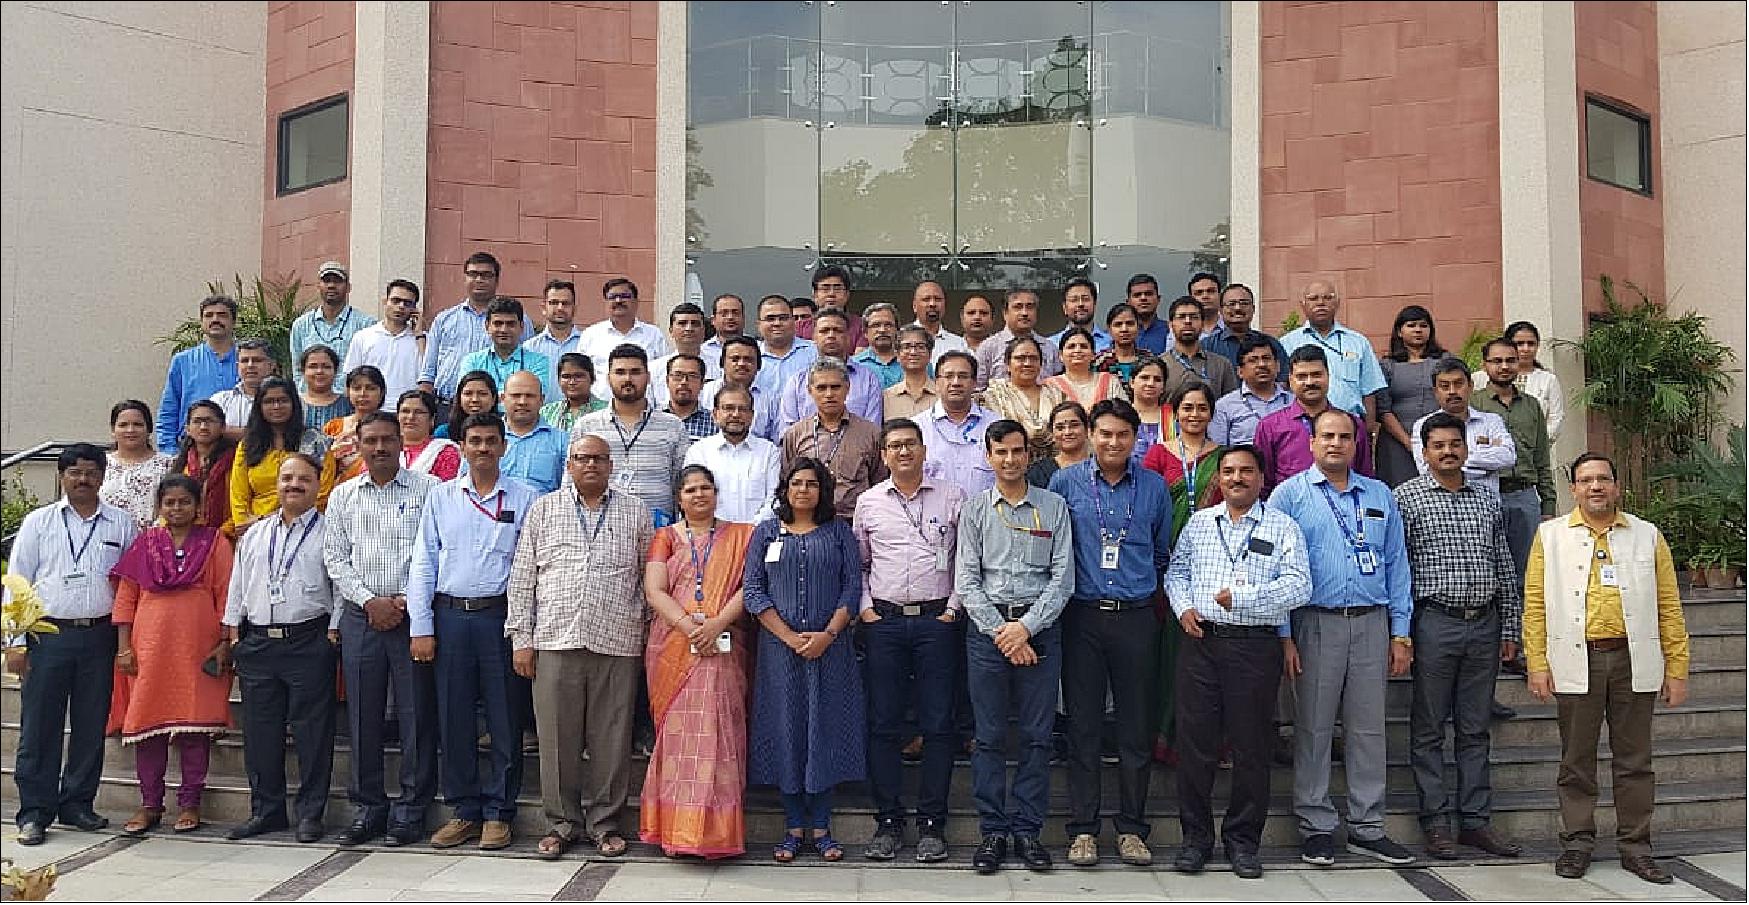 Figure 13: The 'Chandrayaan-2 data users meet', which is third in the series of lunar science meets, was held on October 22, 2019 at the DOS (Department of Space) Branch Secretariat, New Delhi (image credit: ISRO)